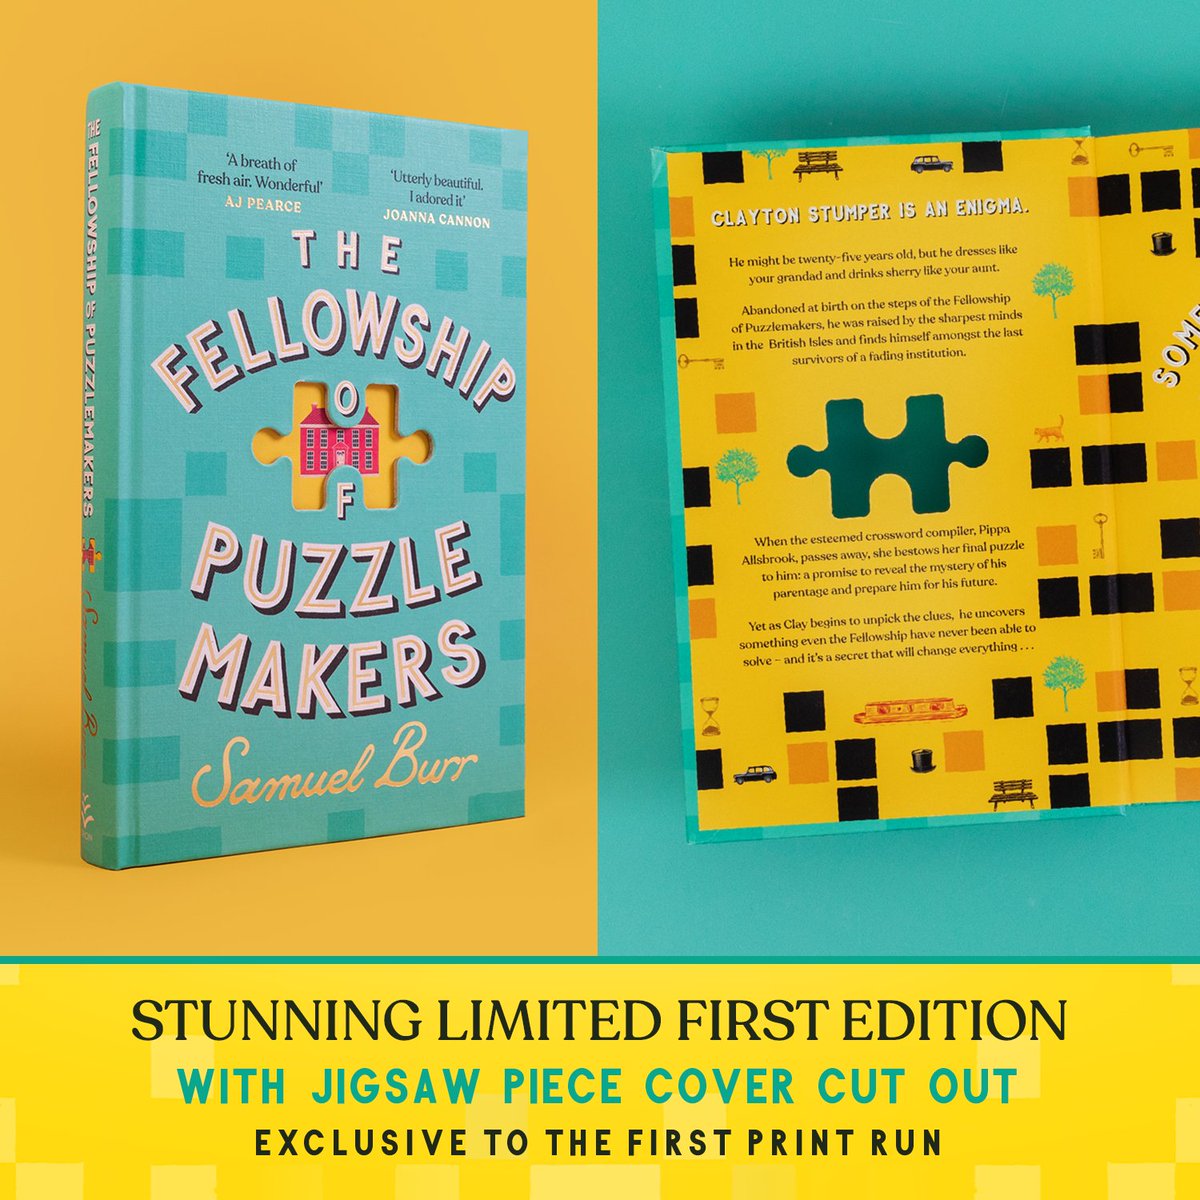 Hurry! Pre-order this stunning limited edition of @samuelburr's The Fellowship of Puzzlemakers featuring a jigsaw cut out before stock runs out! 🧩 Available from all retailers. Publishing this Thursday! geni.us/Puzzlemakers